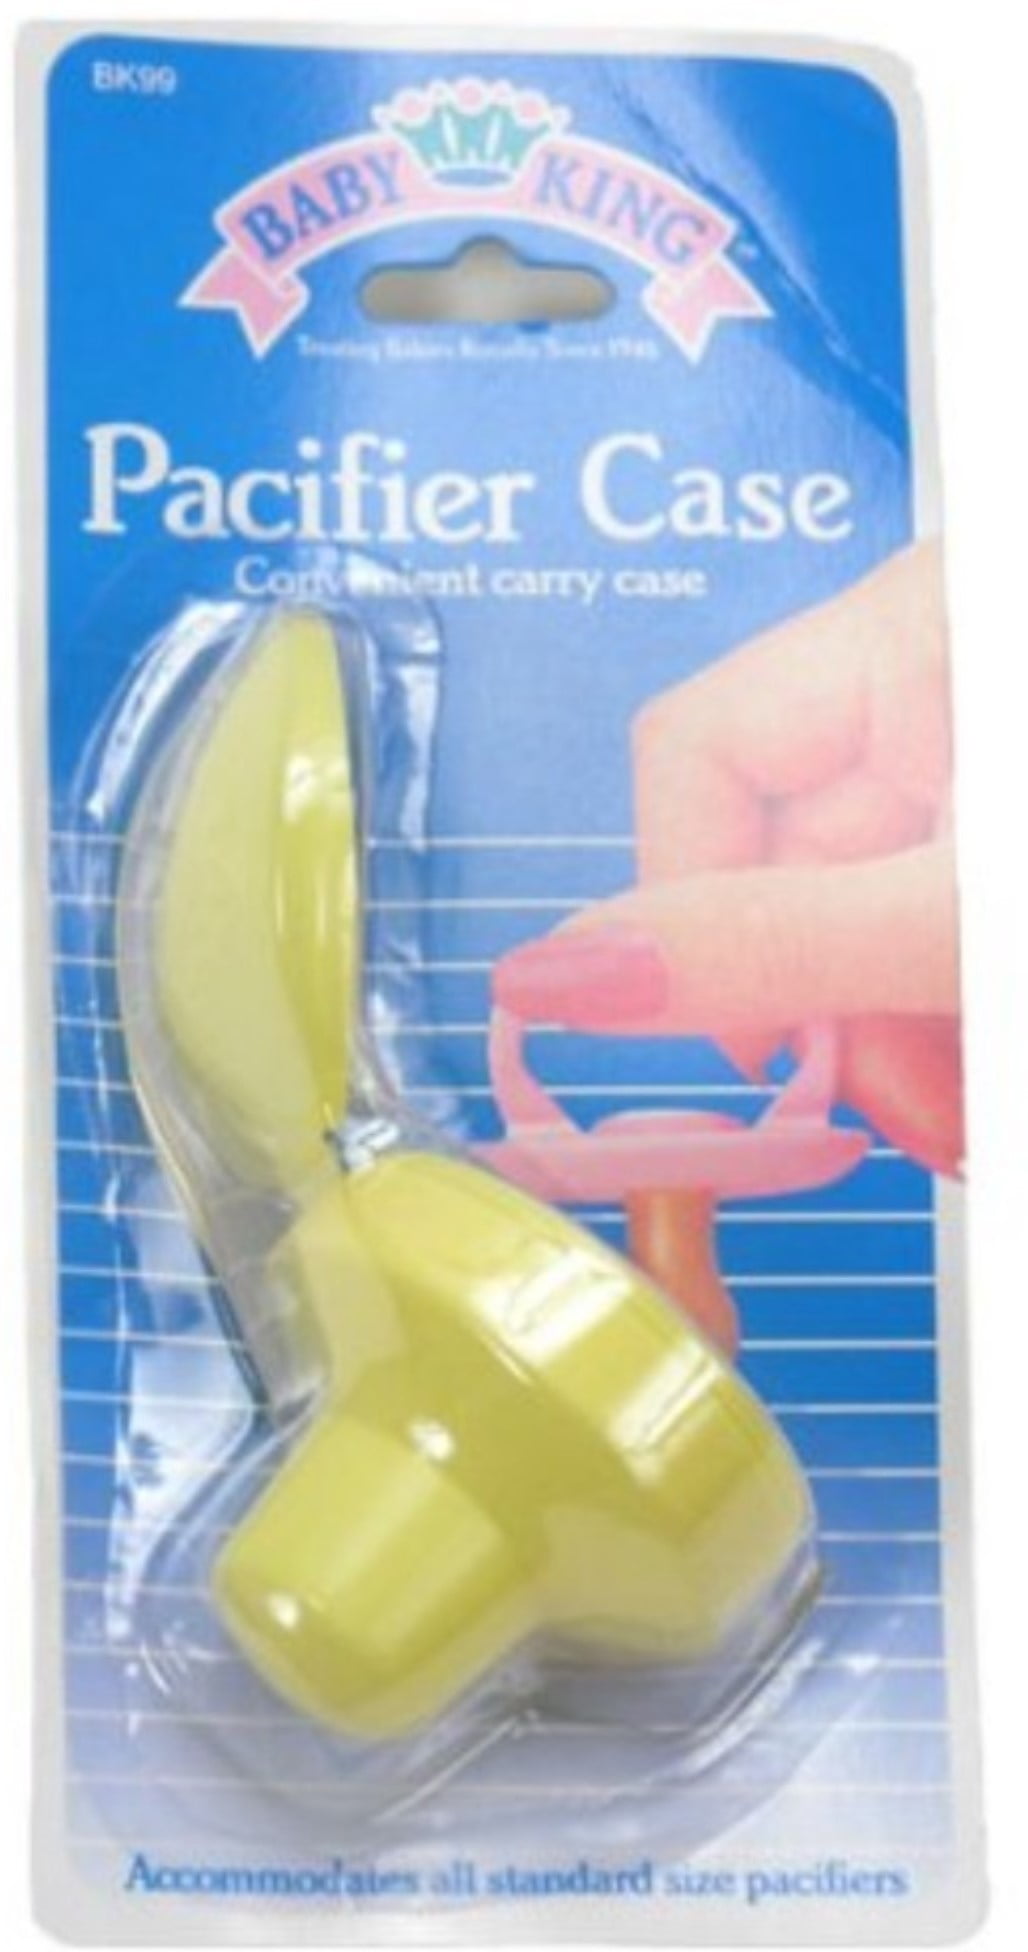 Pack of 2 Baby King Pacifier Convenient Carrying Case 1 ea 